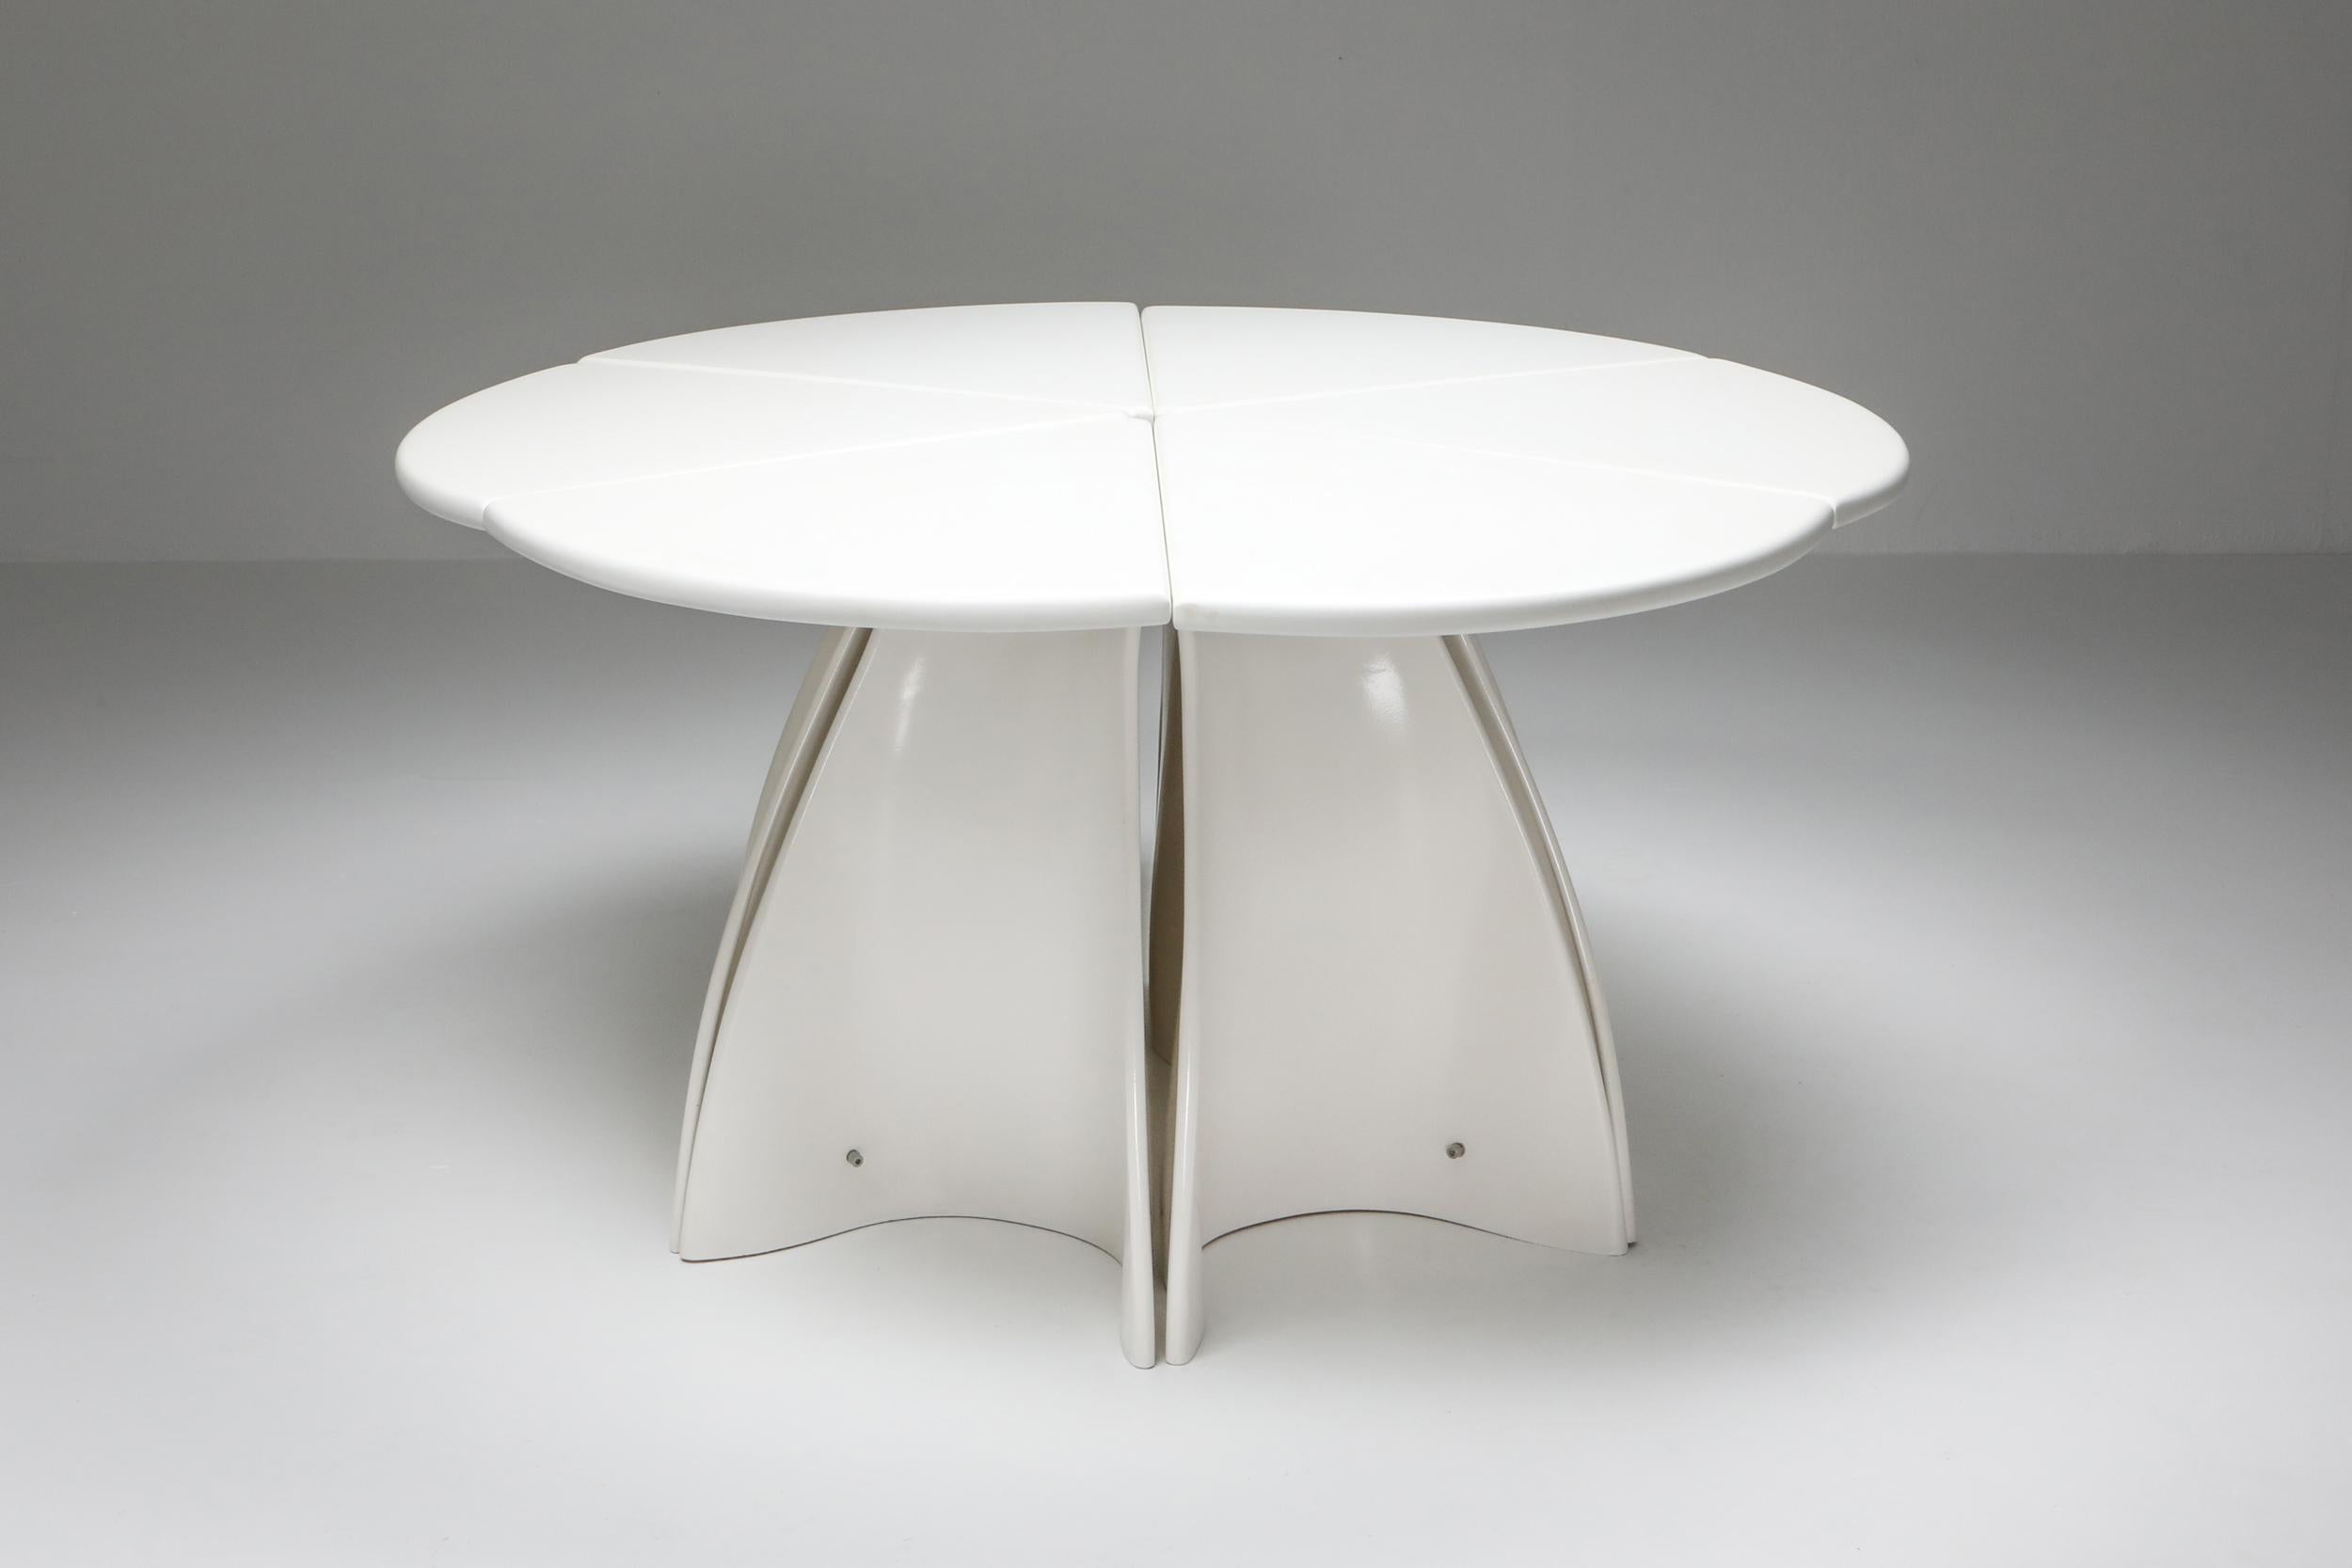 Space Age Postmodern rare piece by Fabio Lenci, Italy 1960s.

This unique tables consists out of 6 ‘petals’ to make a full circle.
Each petal could be separated from the piece to be used as side tables or console tables.
When joined together